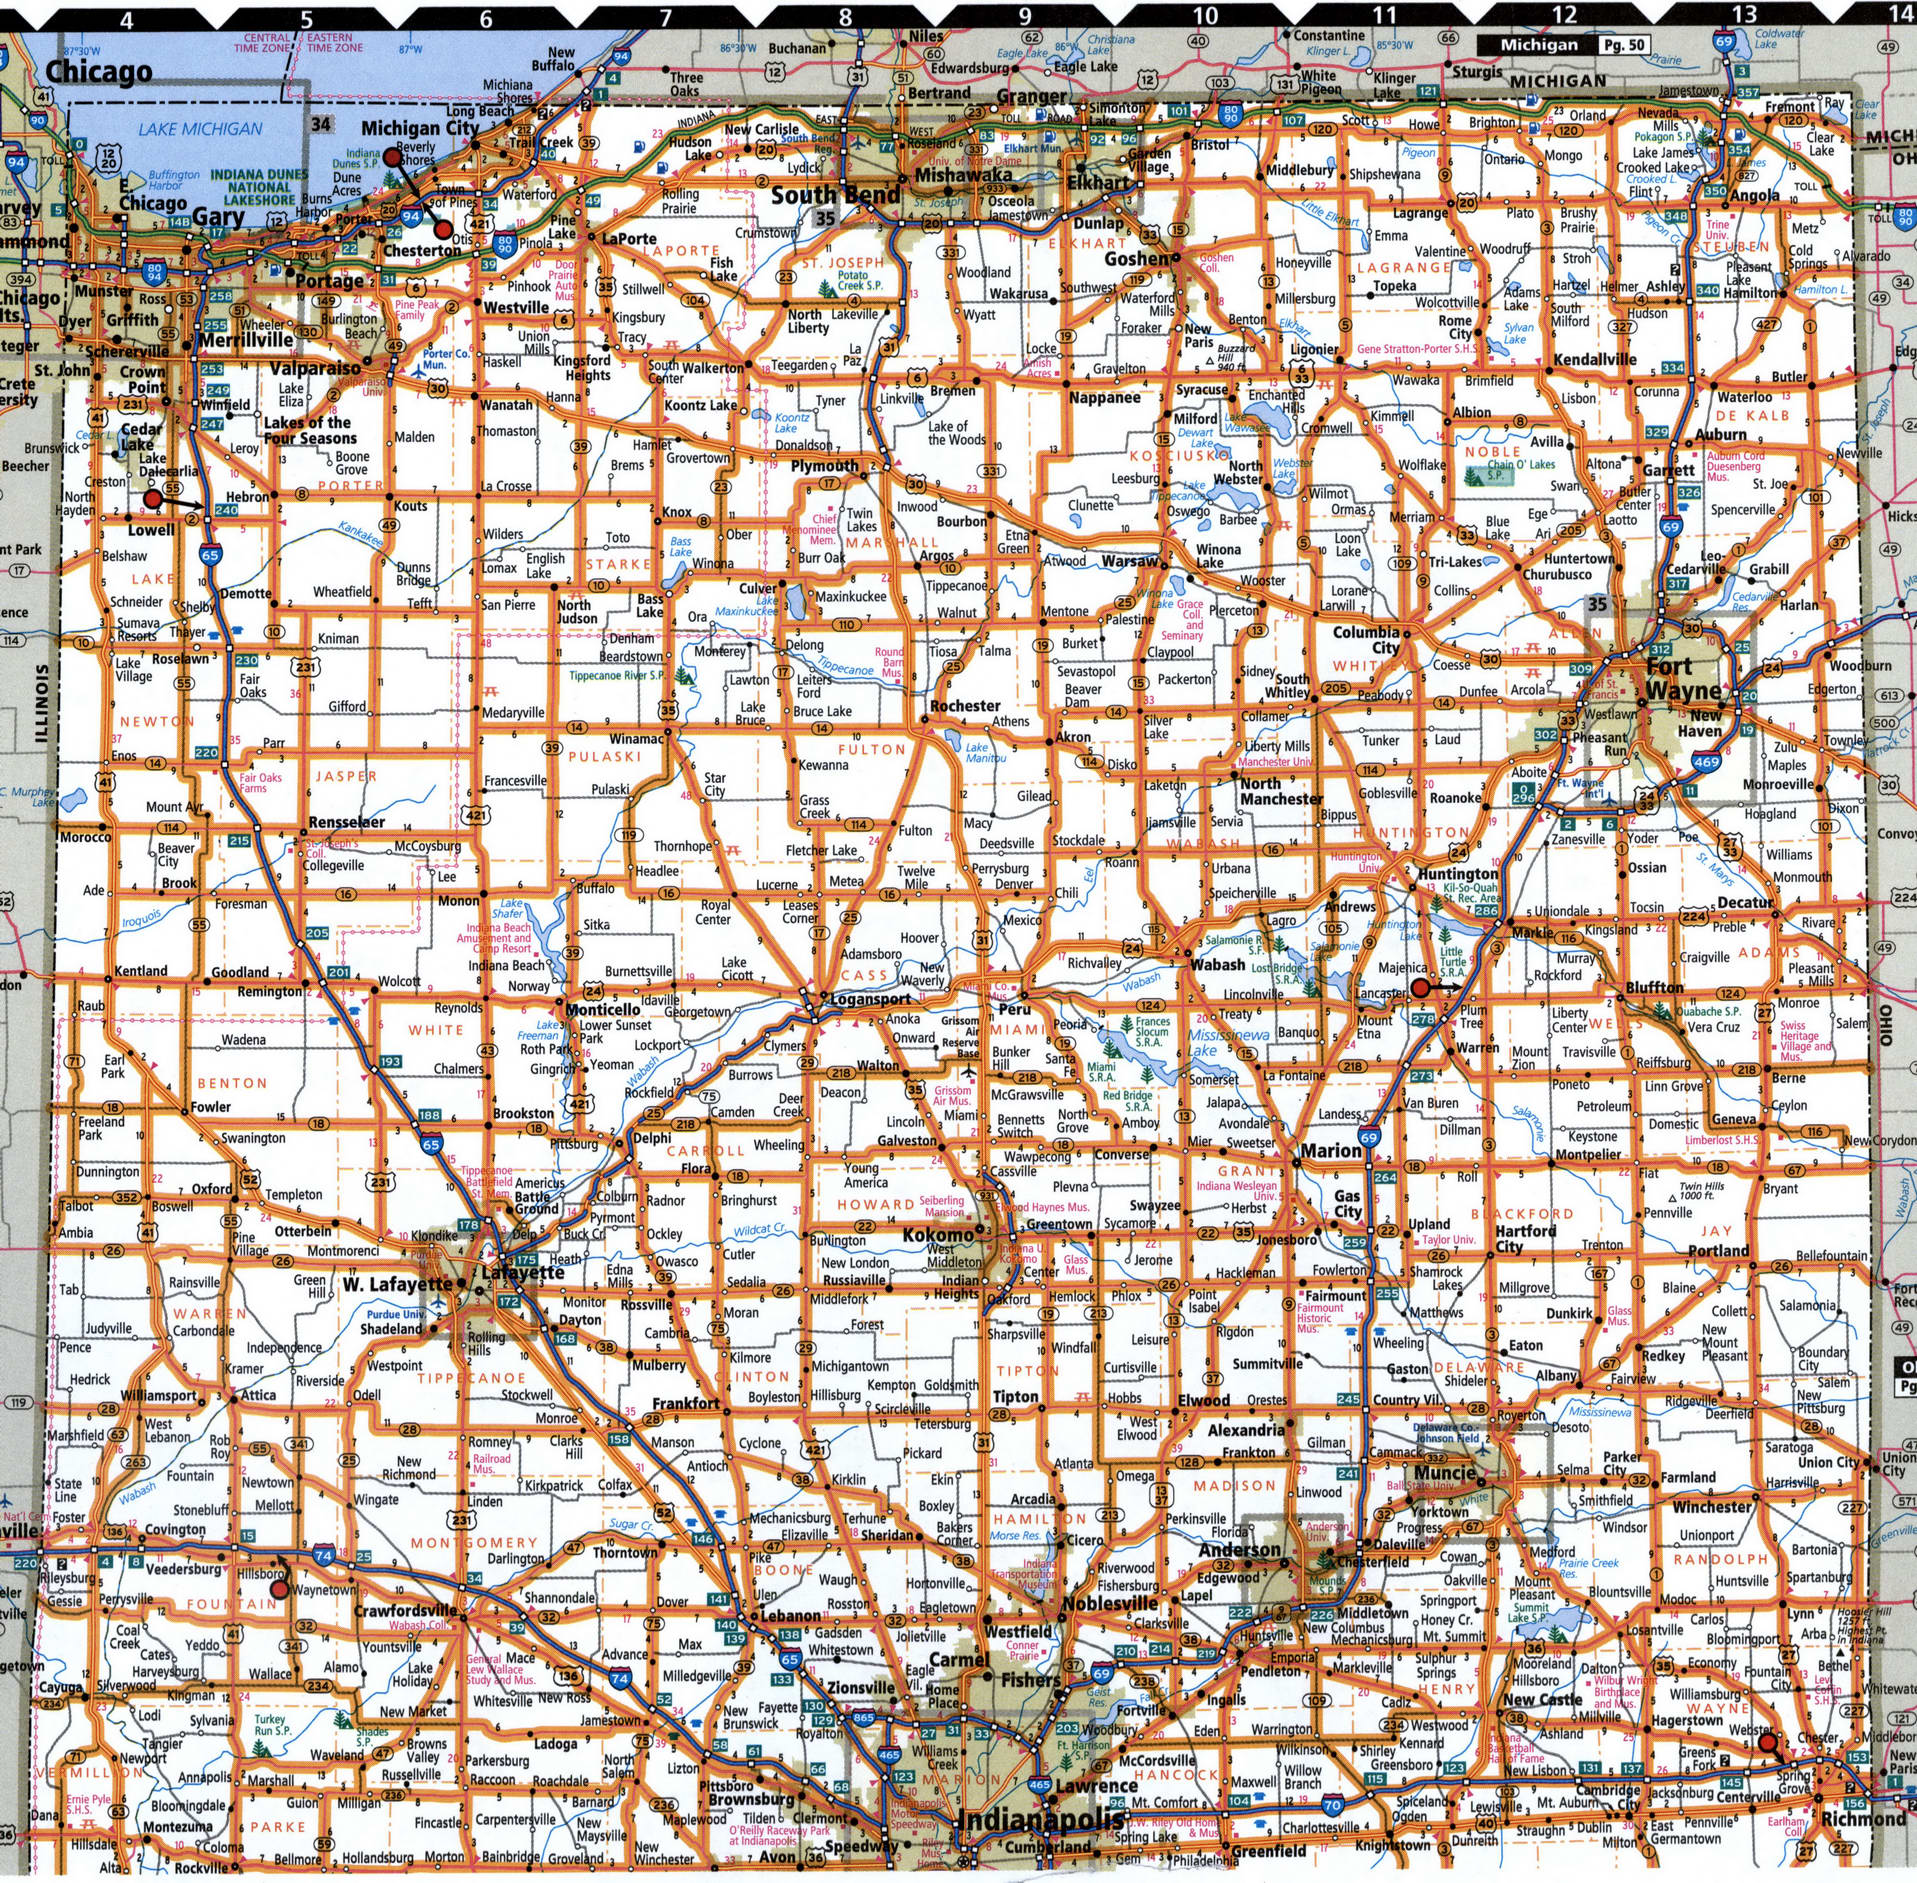 Northern Indiana map for truckers